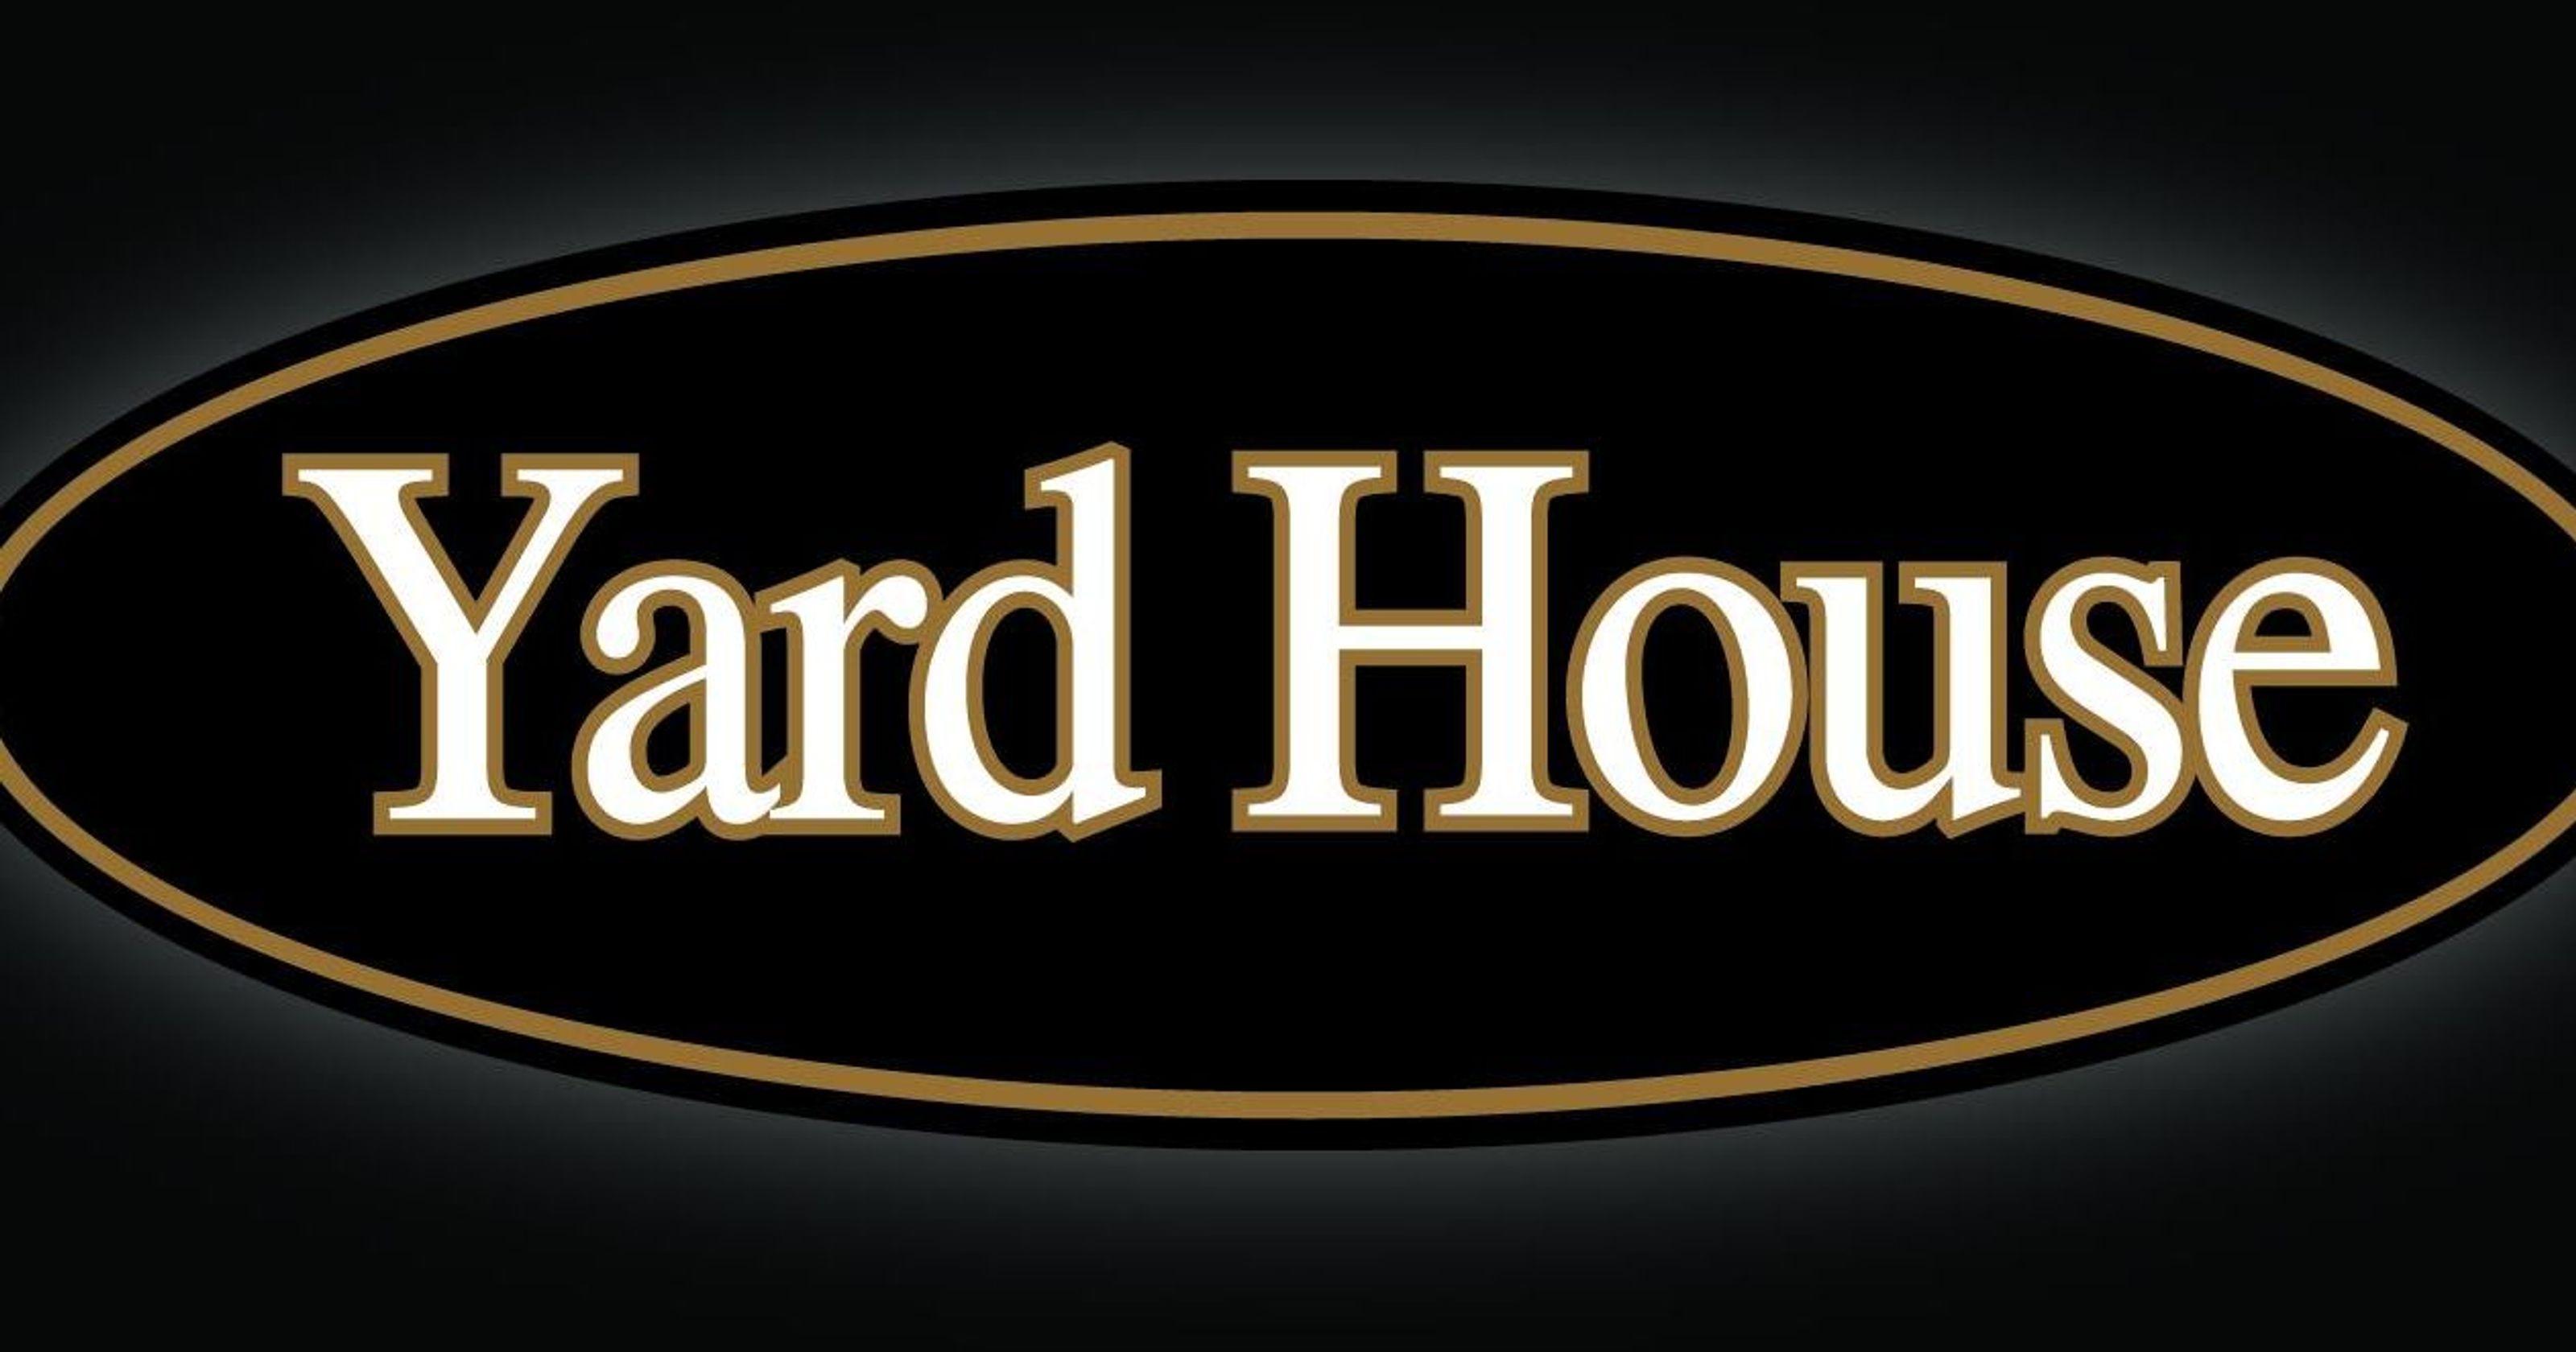 Yard House Logo - Yard House opens with 130 drafts at Magnolia Park